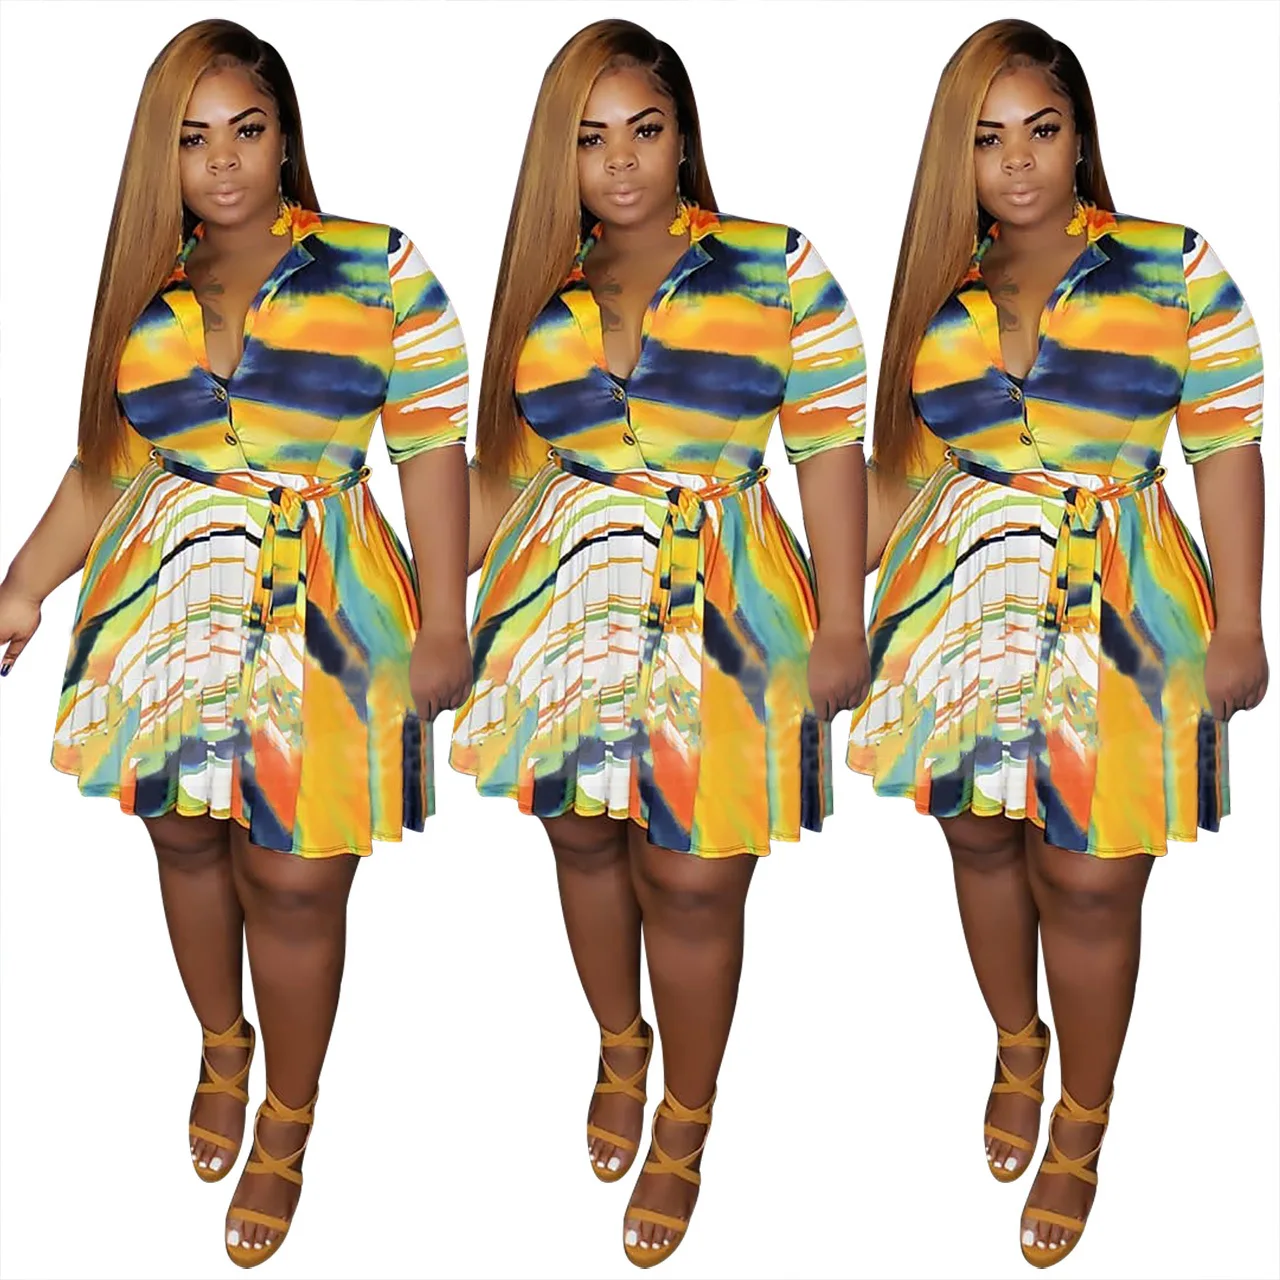 Or-j5094 New Arrival Plus Size Women Clothing Ruffled Printed Short Sleeve  Knee Length Casual Women's Dresses - Buy Plus Size Women's Dresses,Summer  Dress,T-shirt Dress Plus Size Product on Alibaba.com